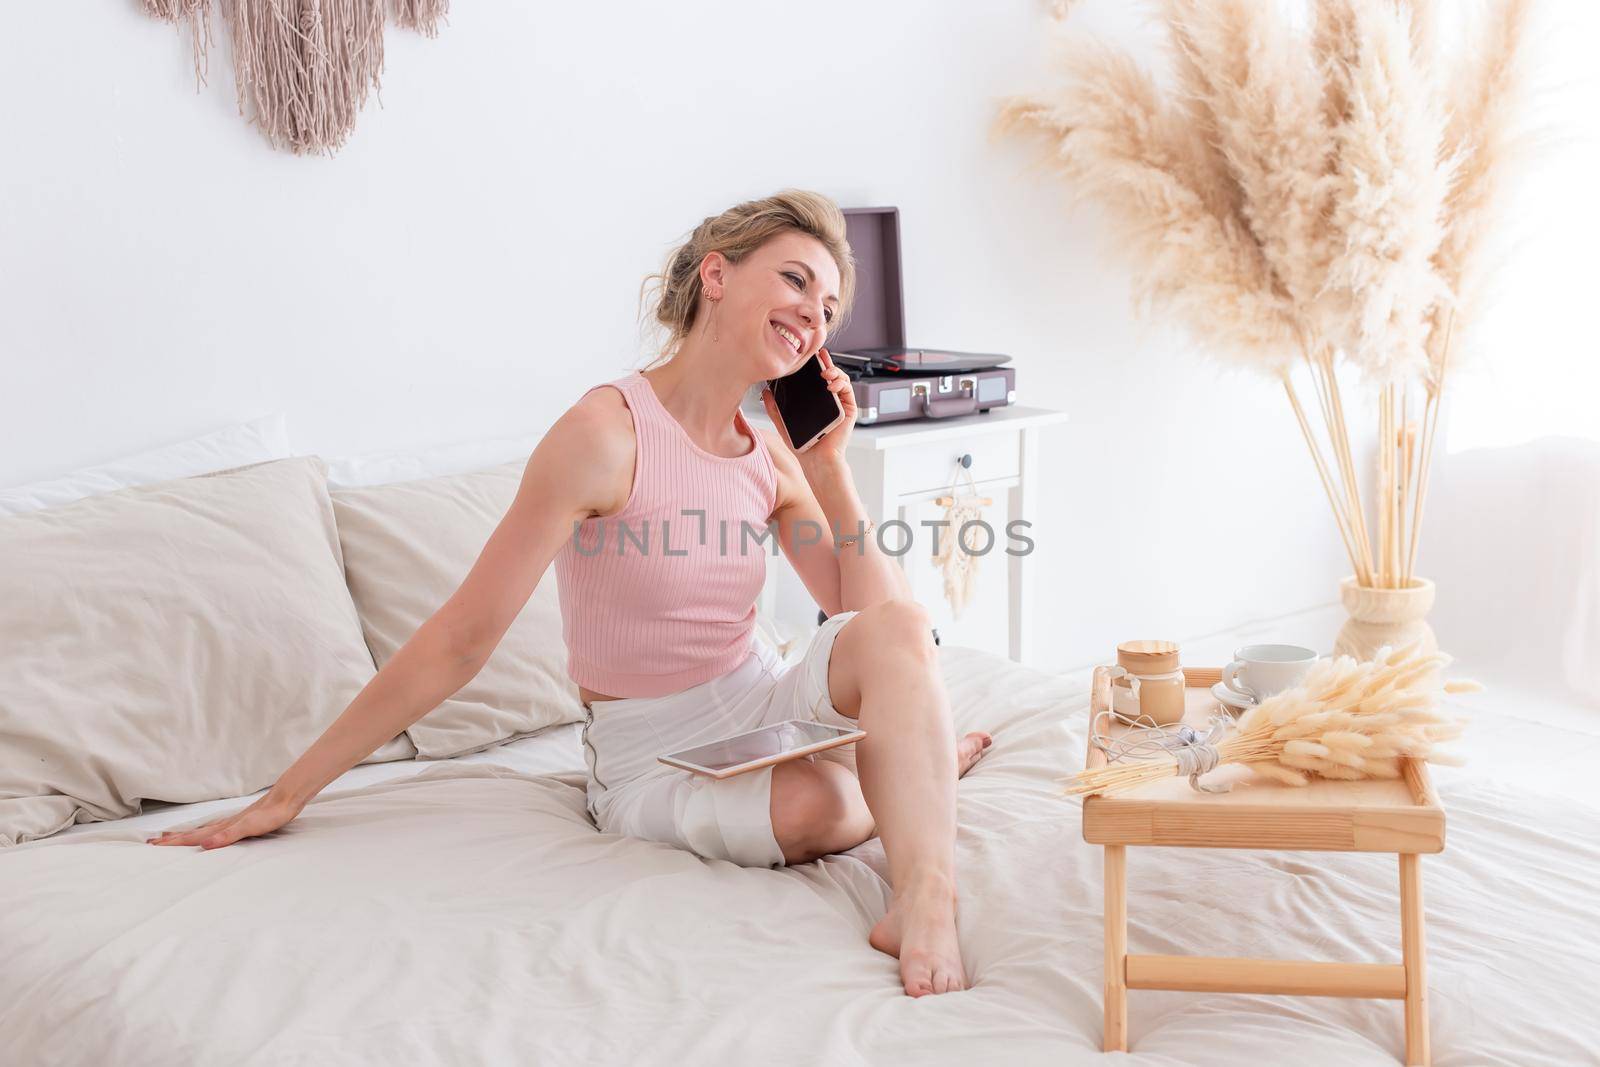 Happy woman with blonde hair, in a pink top and white pants, sitting on the bed in the morning, in a bright bedroom interior, calling on a smartphone